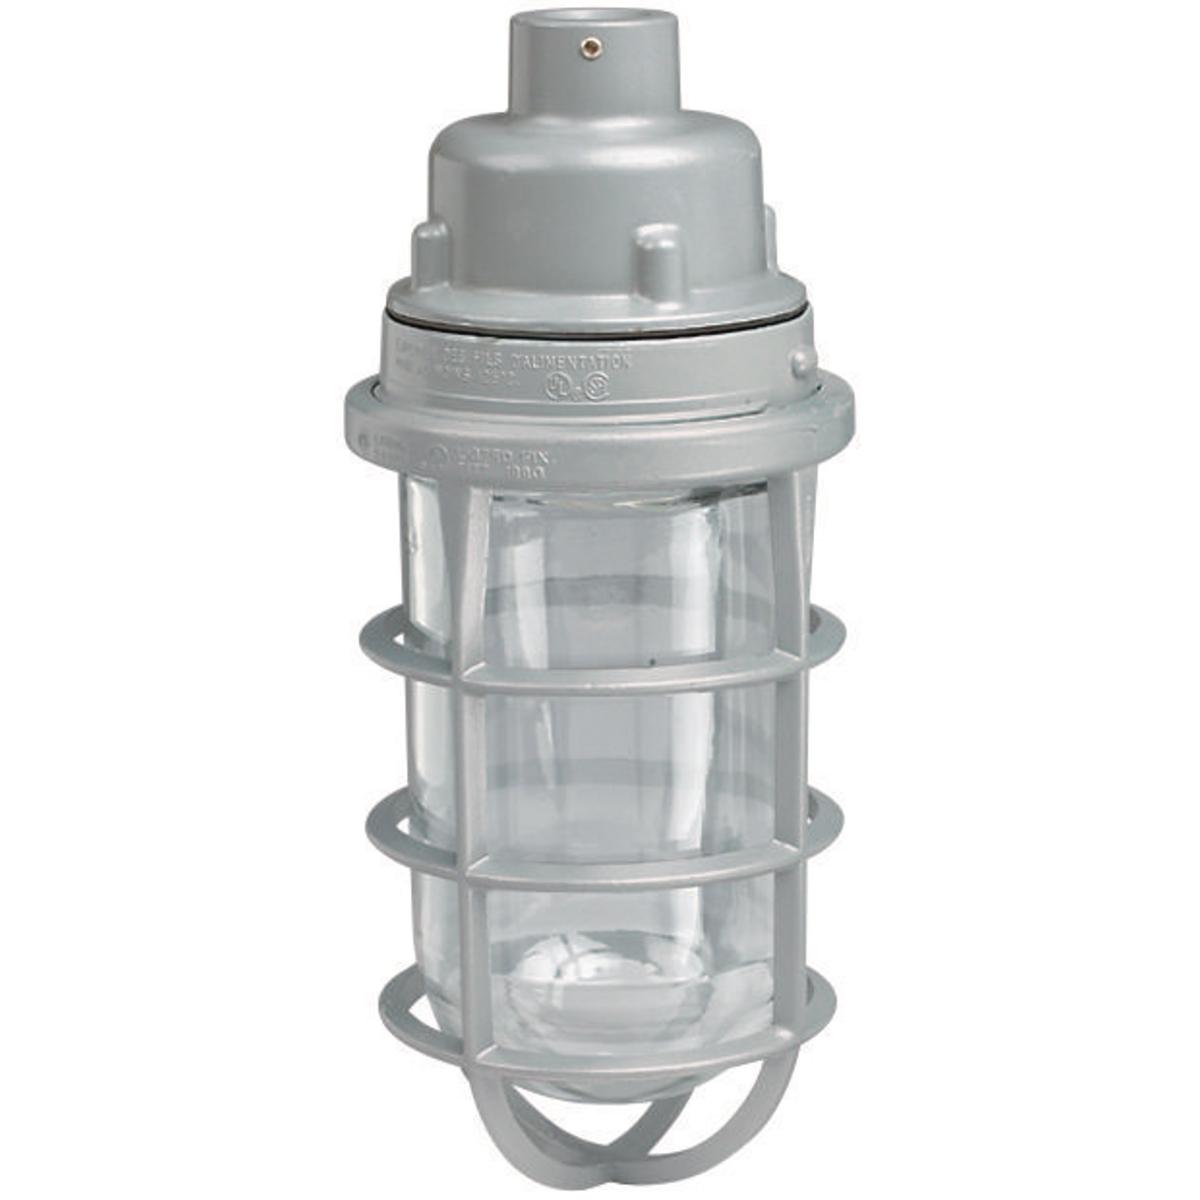 Hubbell VUAG-2-200 200W V Series Incandescent - Pendant - 3/4" Hub With Globe  ; Electrostatically applied epoxy/polyester finish ; Modular design ; Hubs are threaded for attachment to conduit ; Set screws in pendant fixture ; Copper-free aluminum (less than .004%) ; The V 